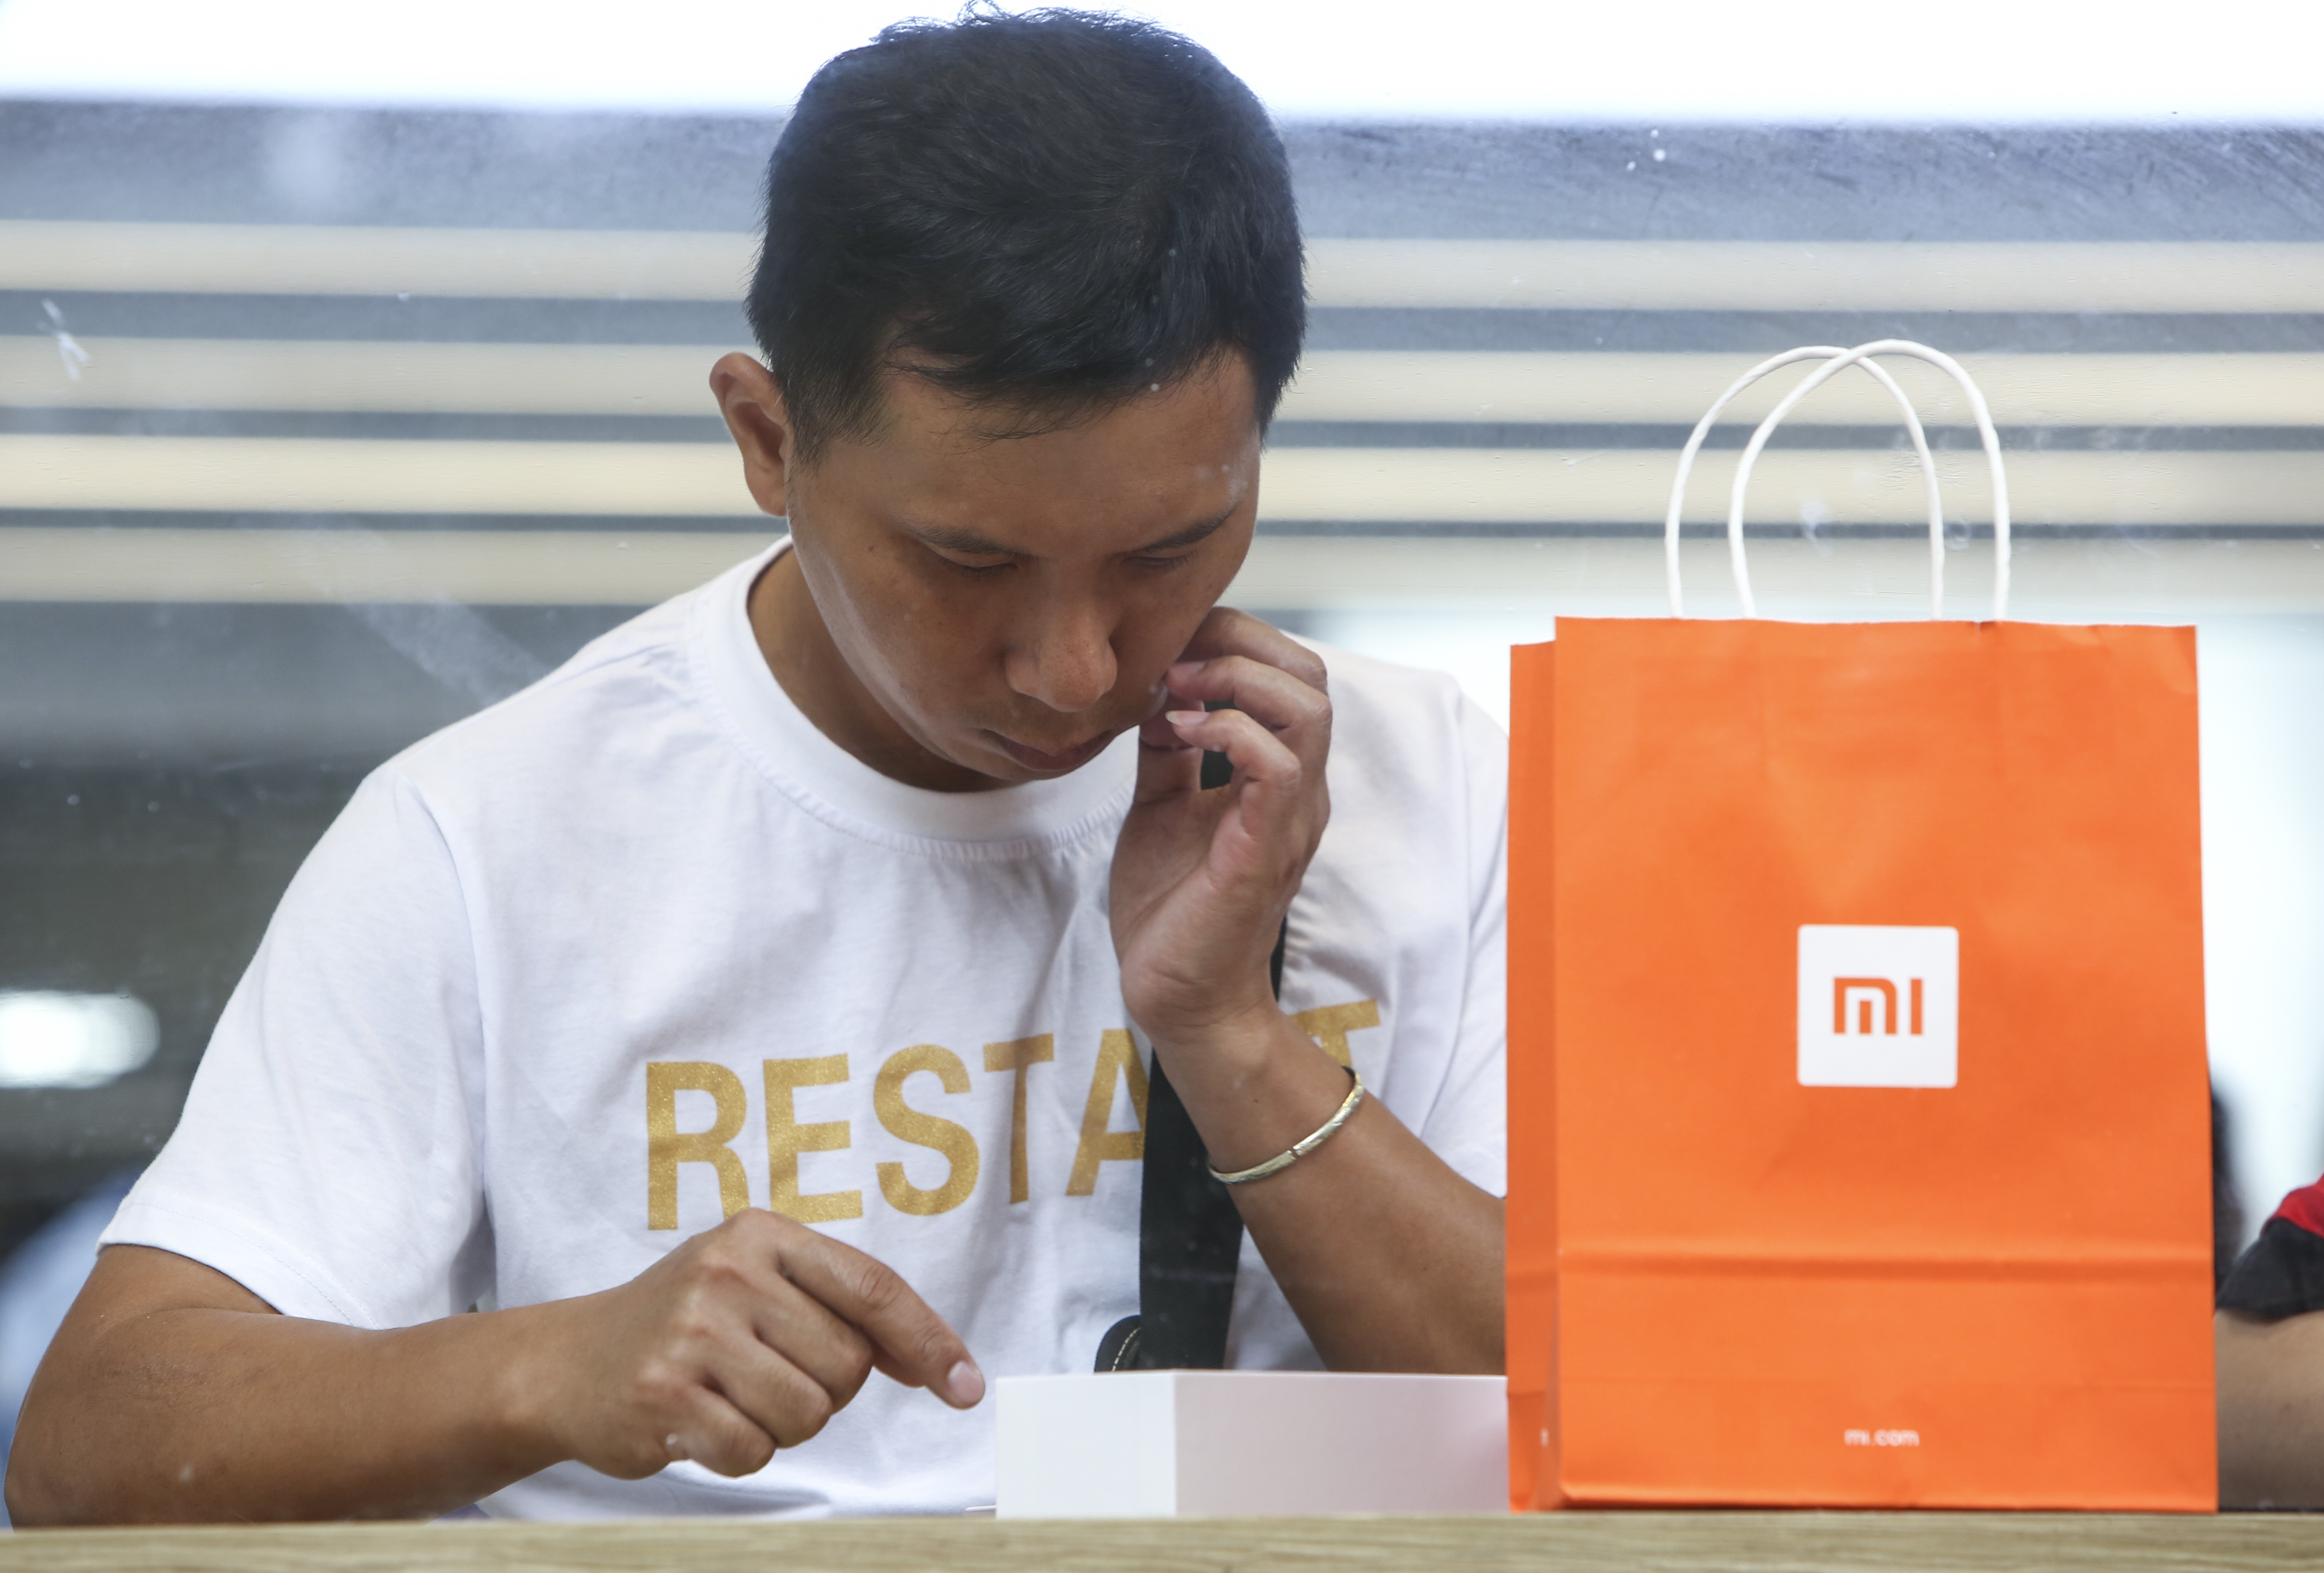 Customers visit to a Xiaomi Store in Mong Kok, Hong Kong on 25 June 2018. Photo: SCMP/Edmond So